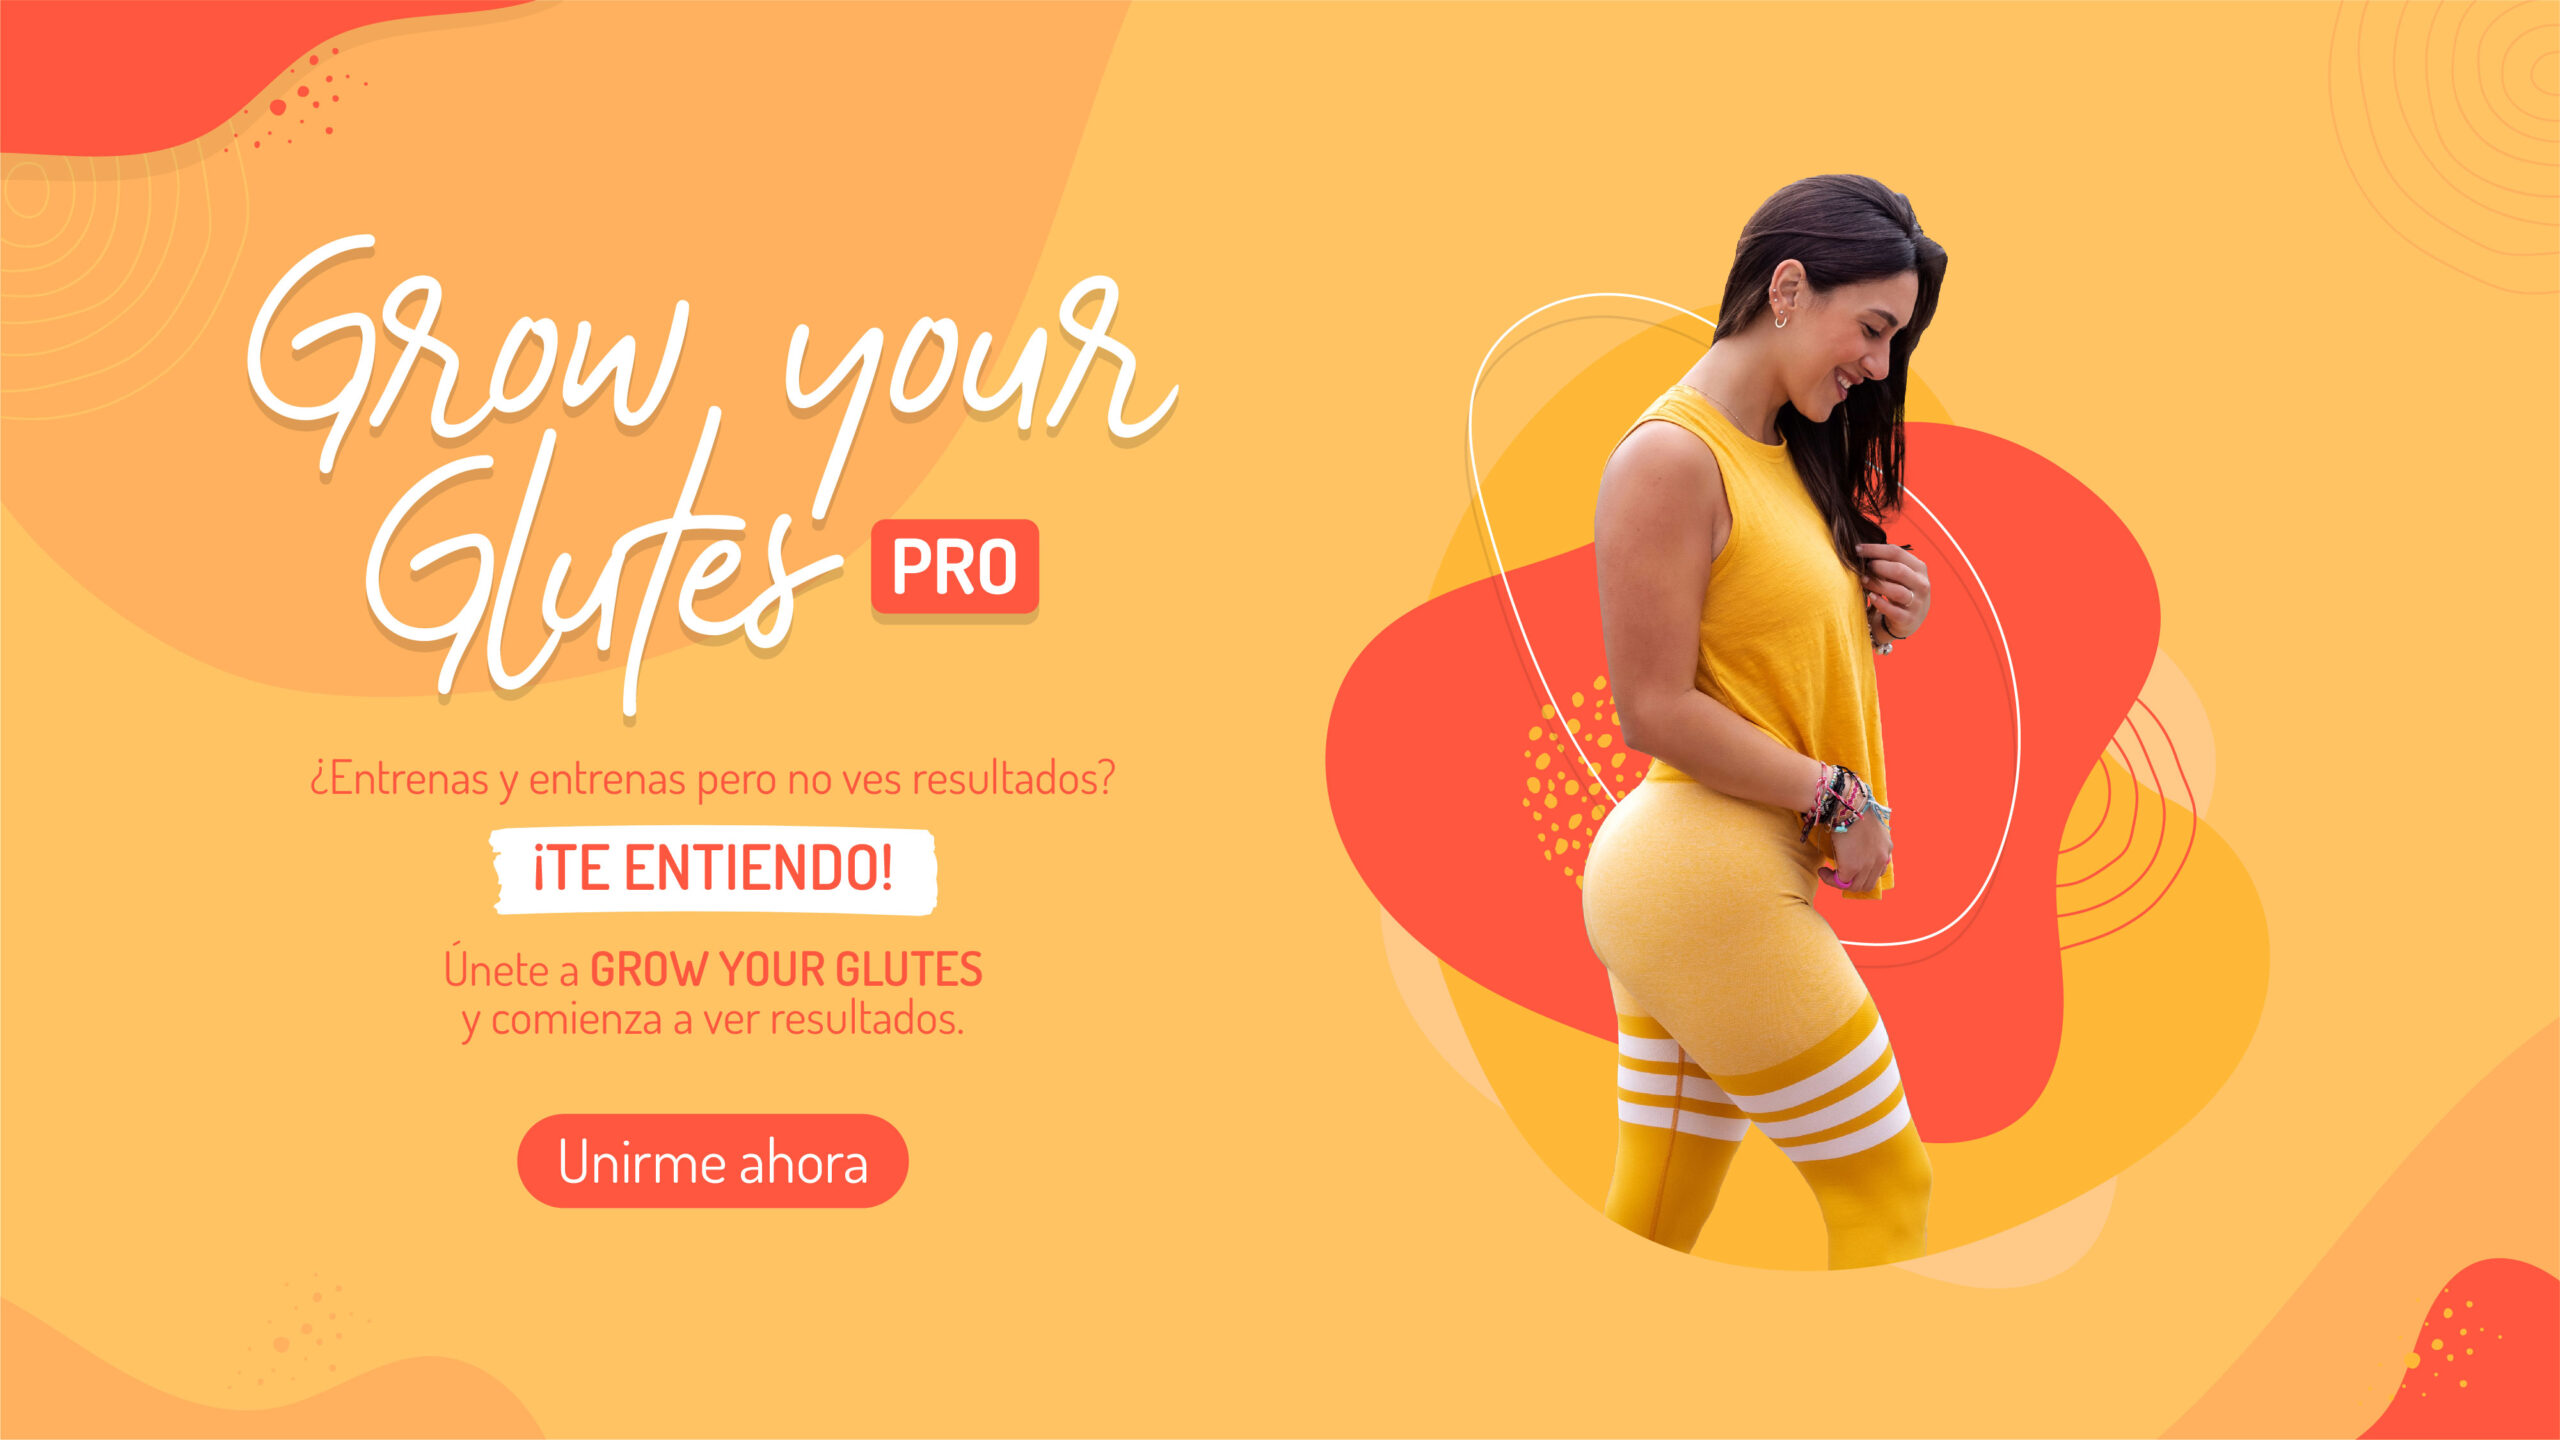 GROW YOUR GLUTES PRO